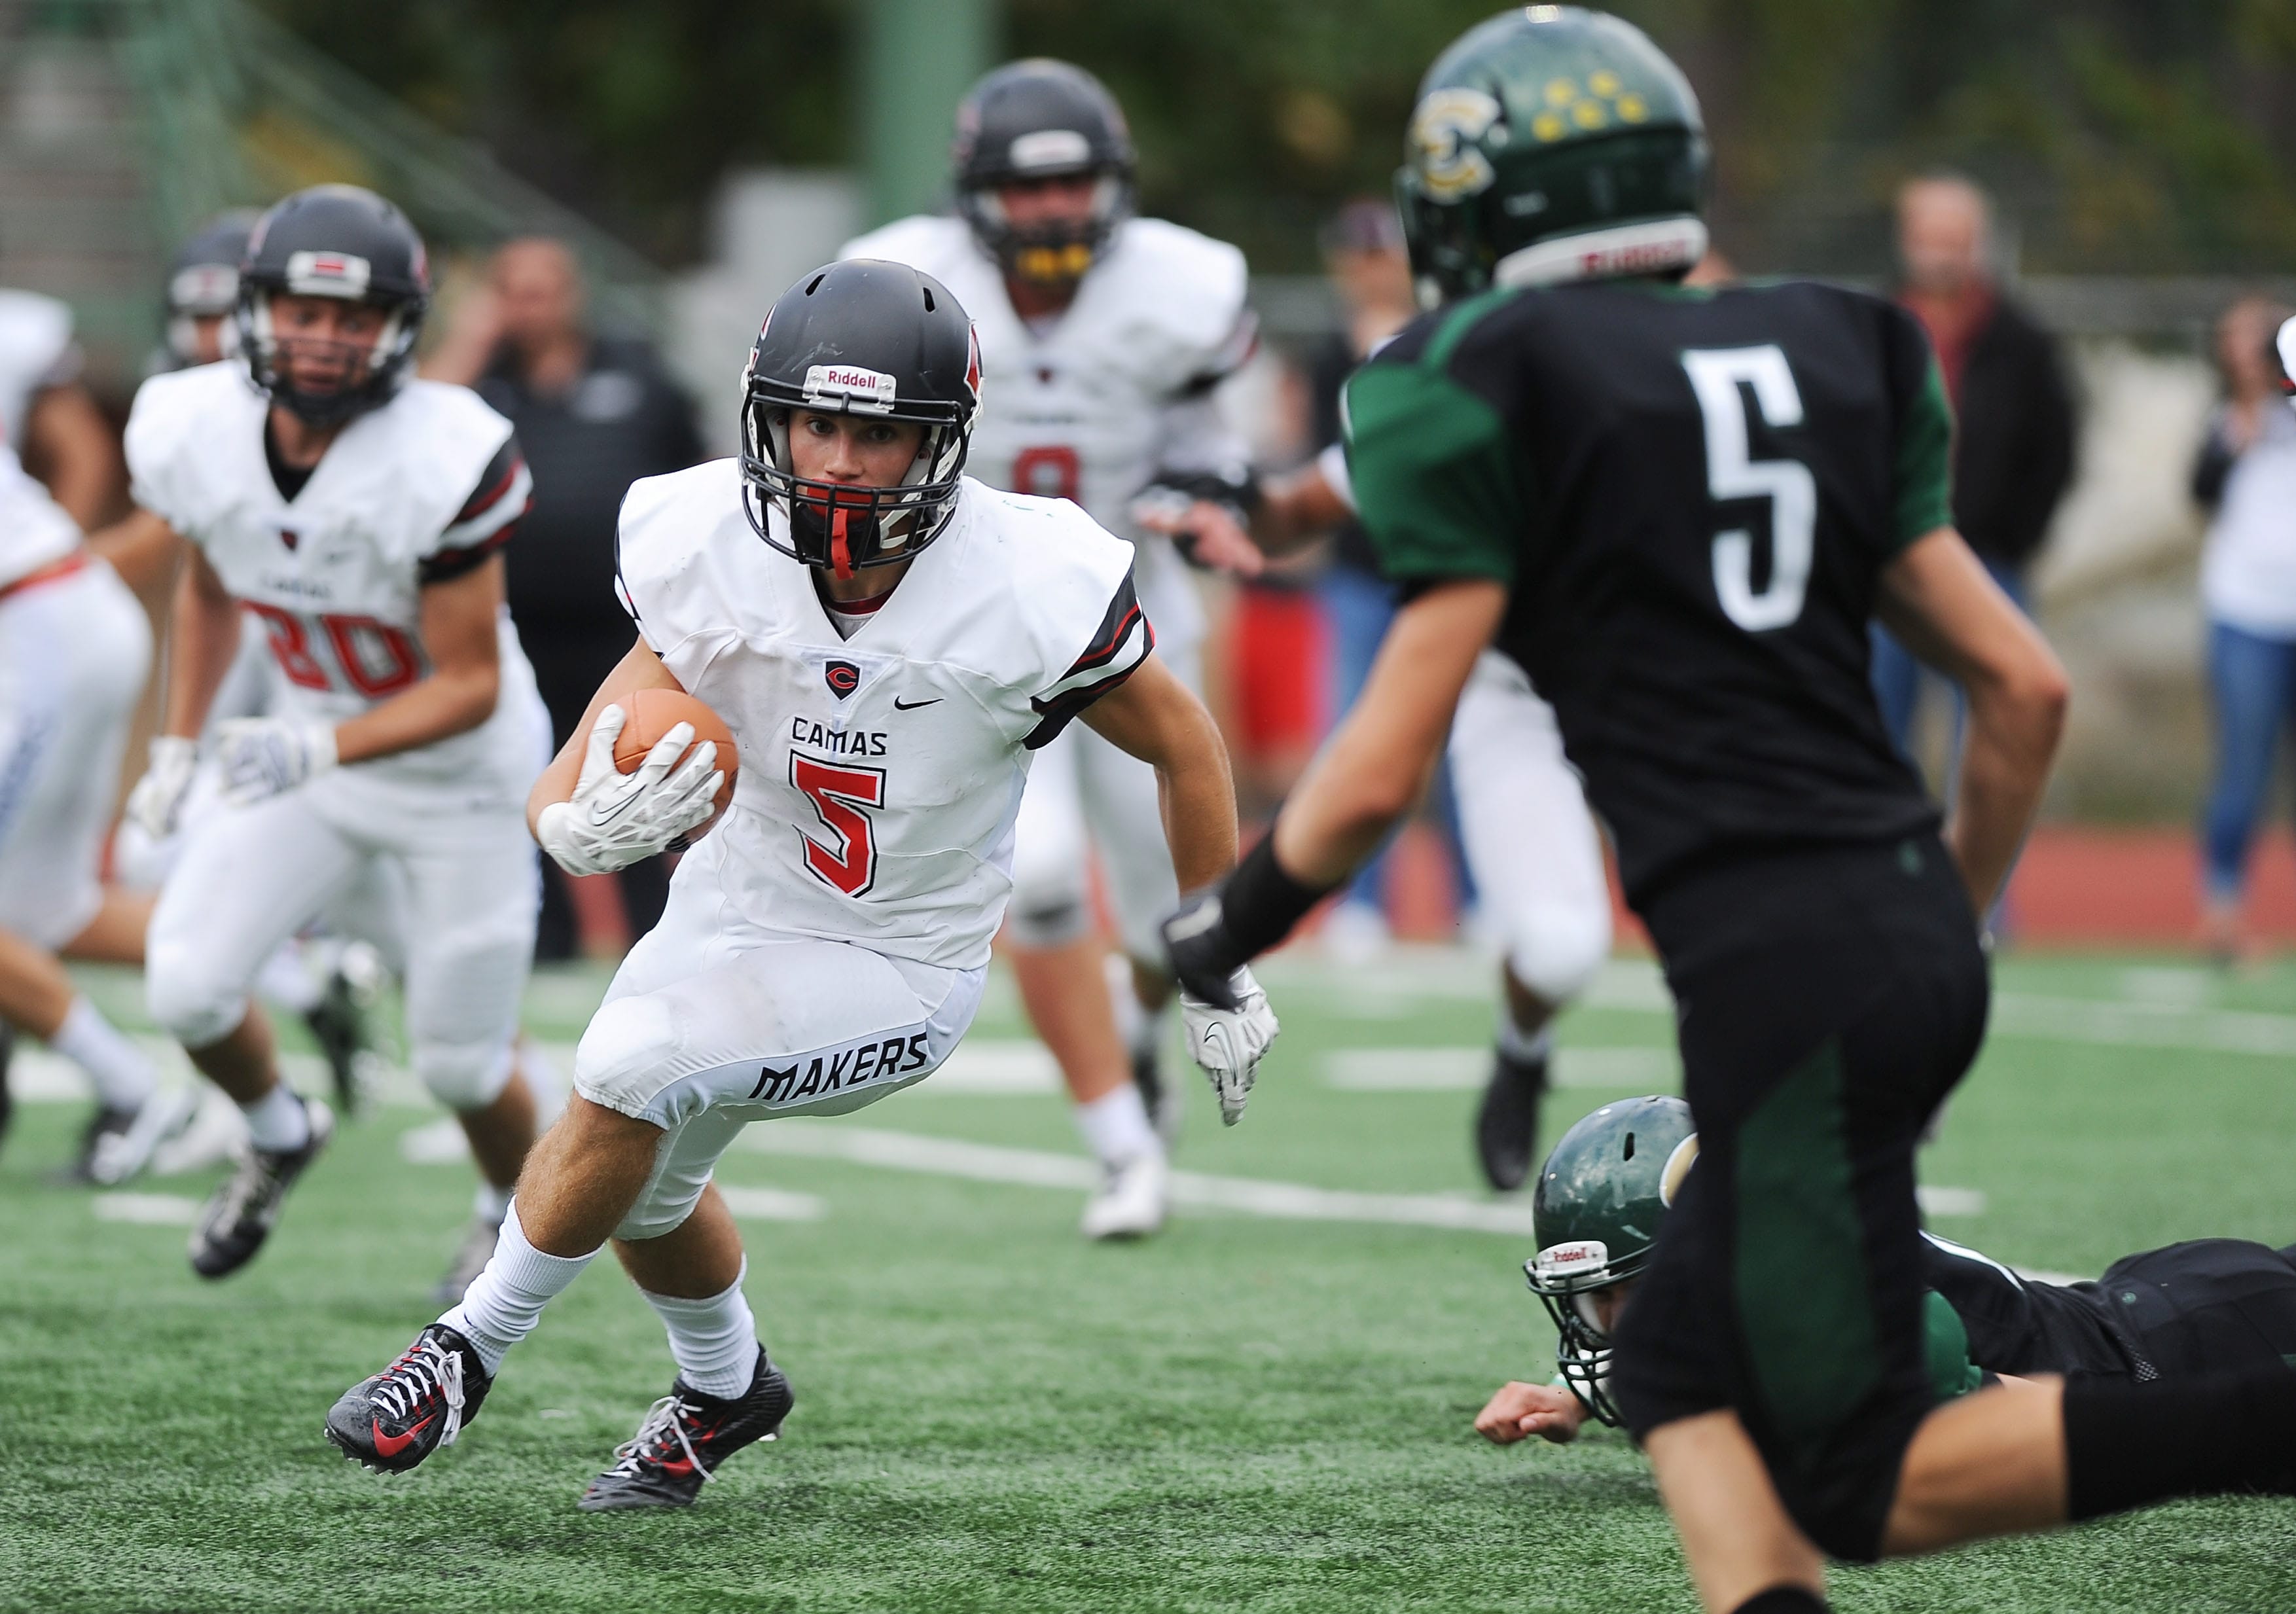 Camas player Jared Bentley runs with the ball during a game against Evergreen at McKenzie Stadium on Friday.